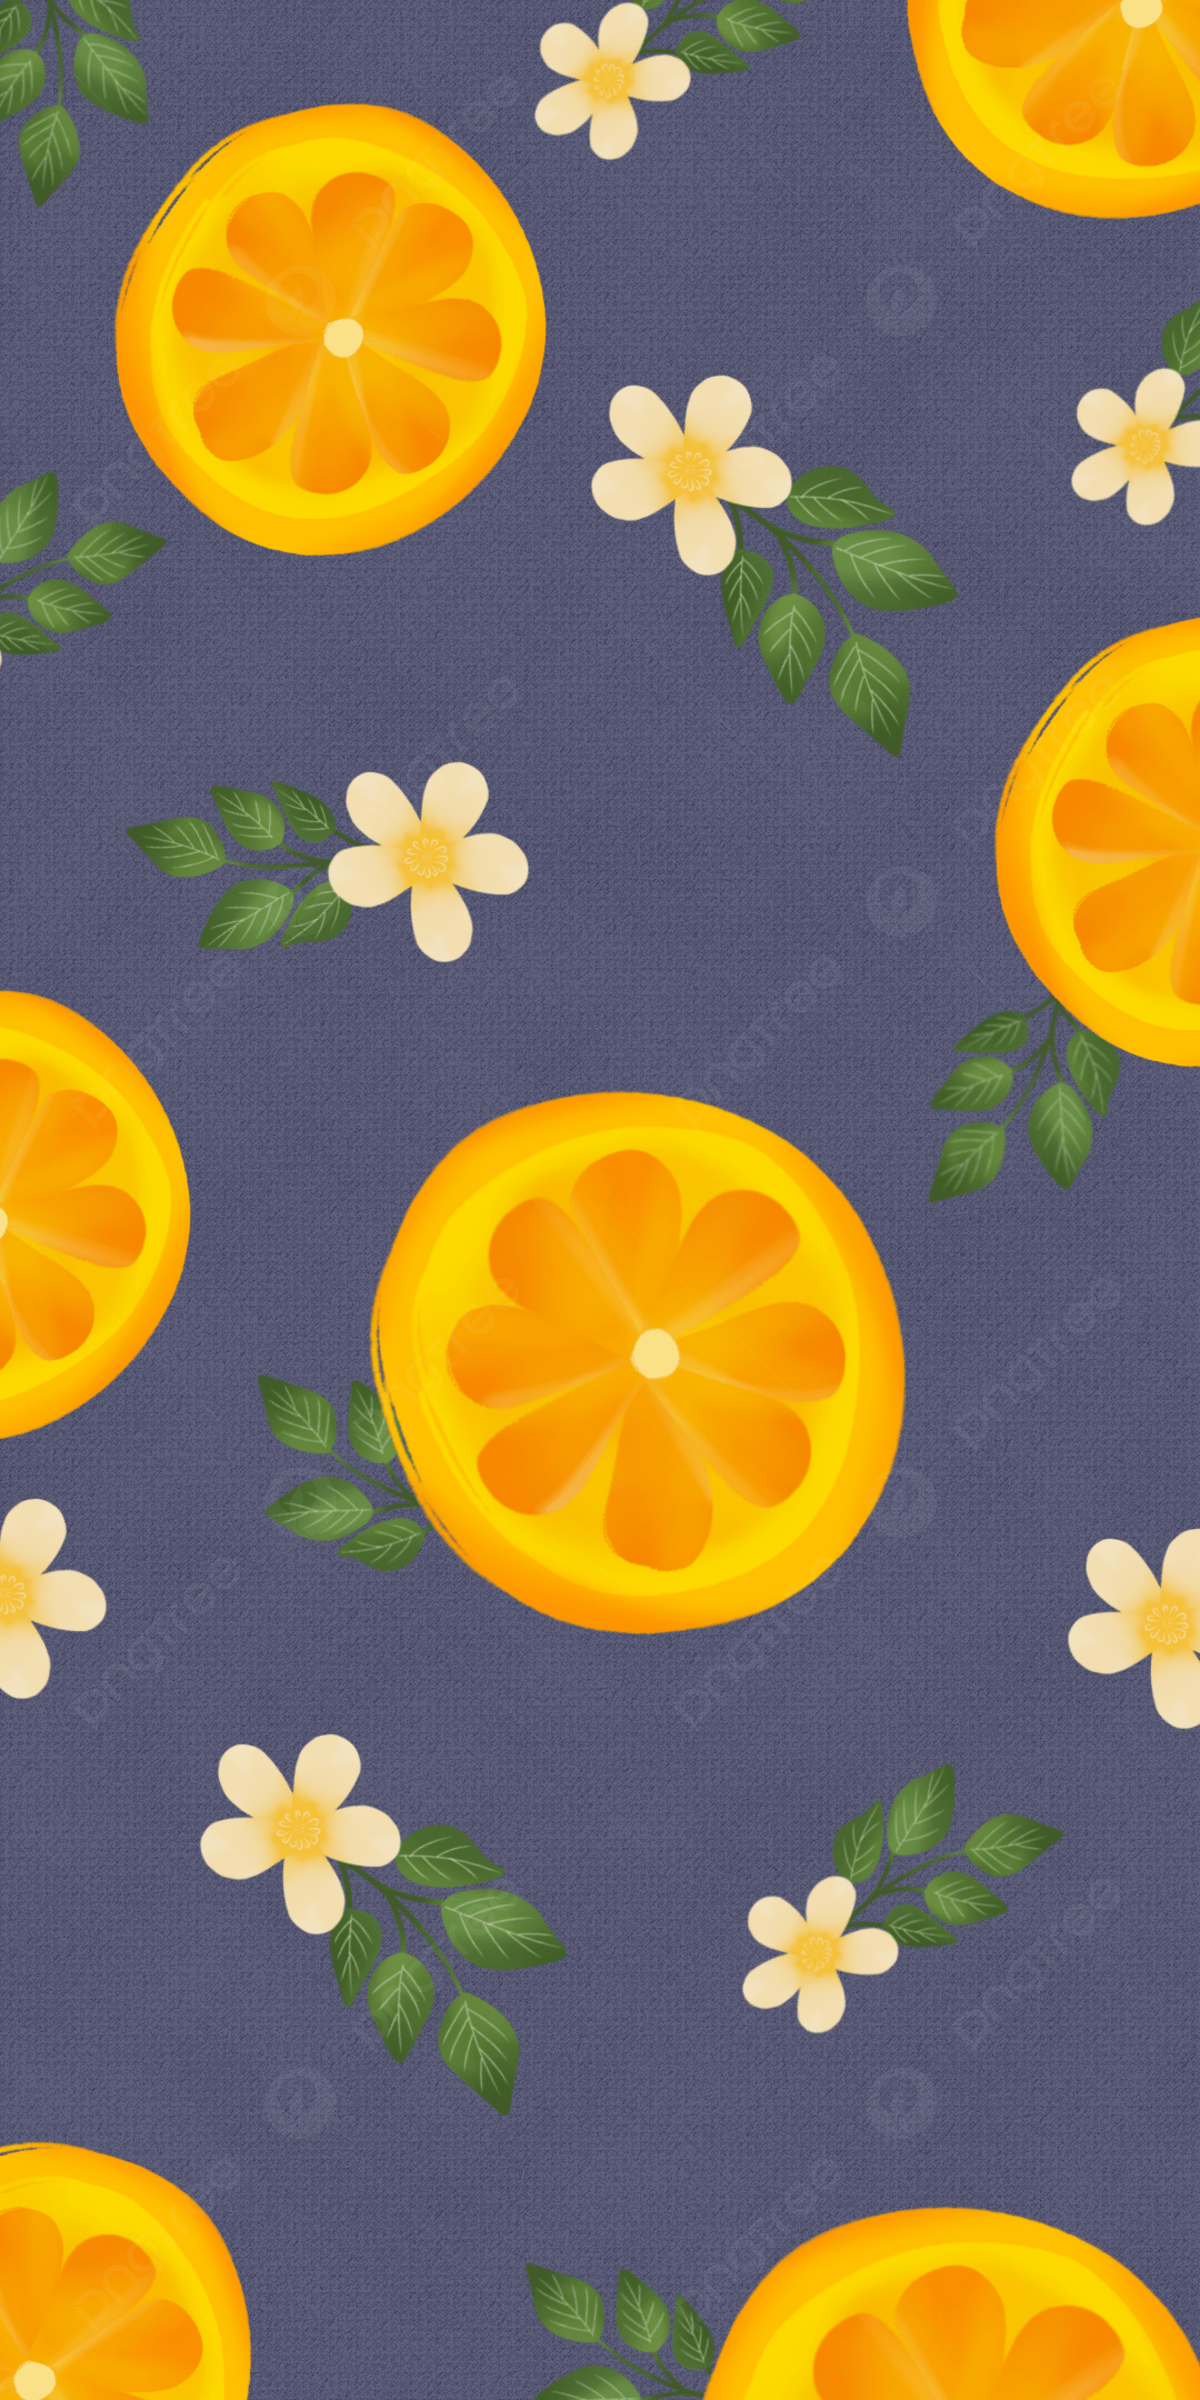 Seamless Oranges Fruit Pattern Mobile Wallpaper Background, Orange Fruit, Pattern, Mobile Wallpaper Background Image for Free Download